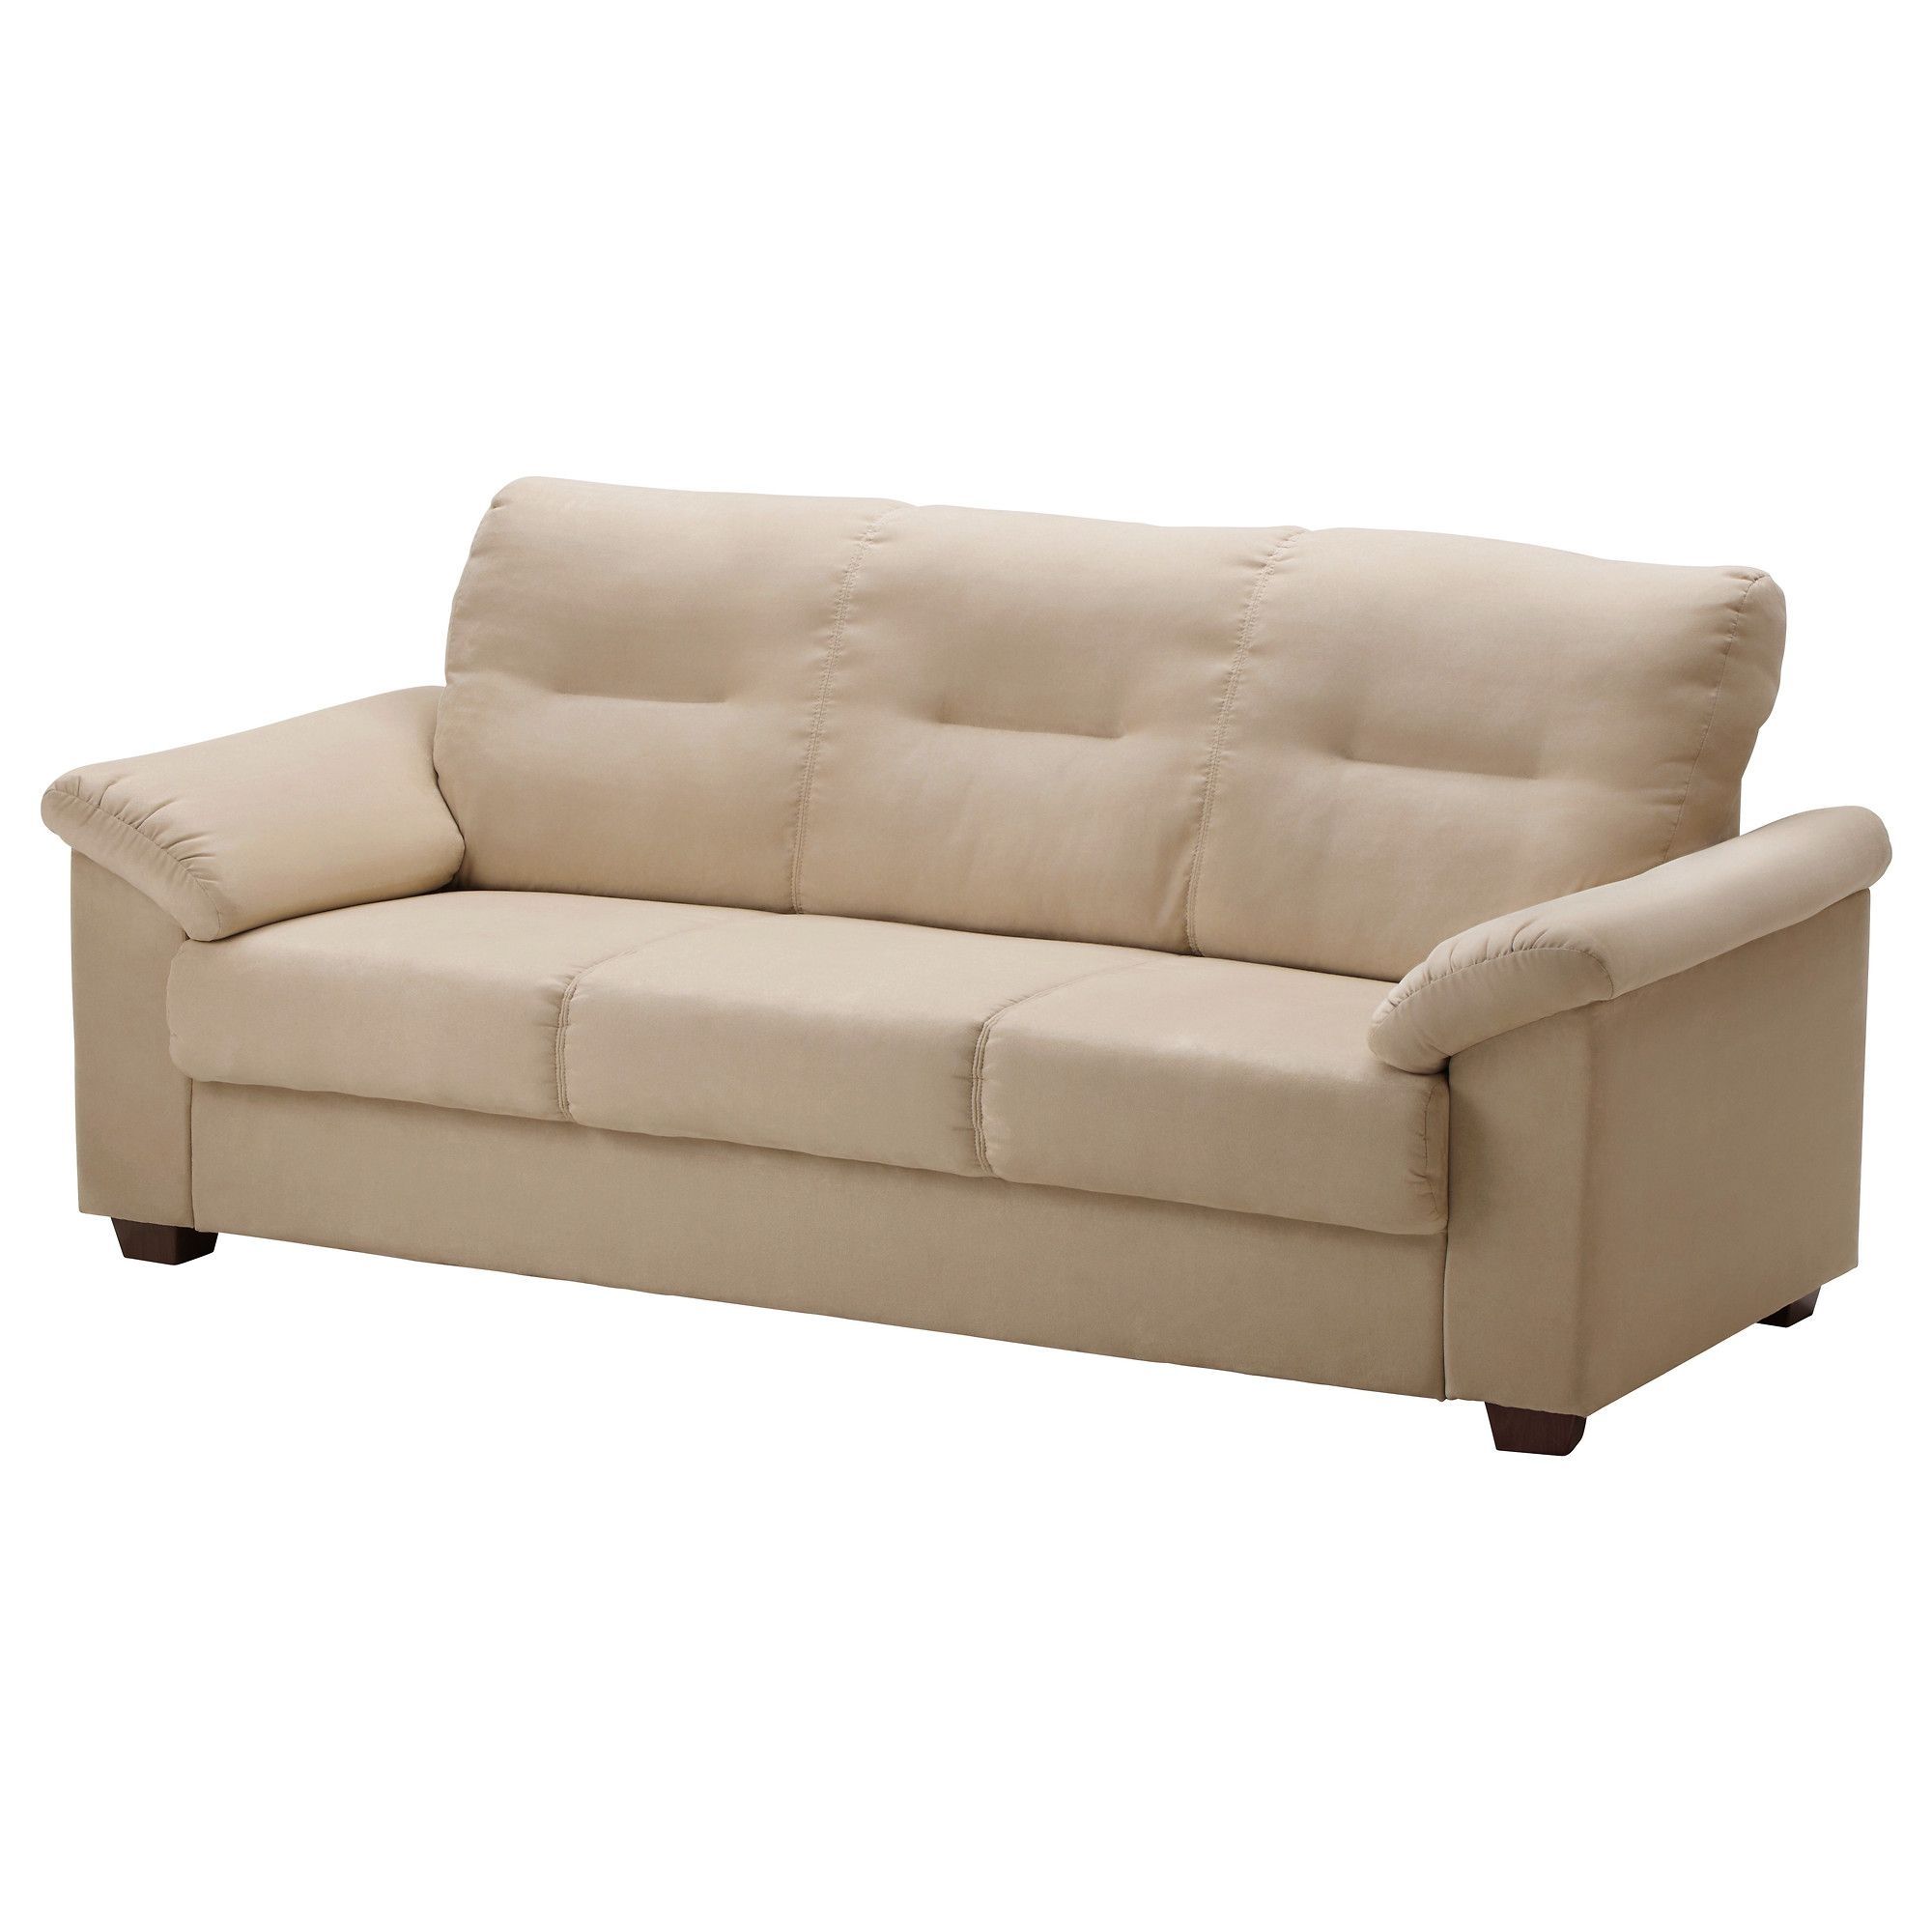 Ikea – Knislinge, Sofa, Kungsvik Sand, , The High Back Provides Good Within Taron 3 Piece Power Reclining Sectionals With Right Facing Console Loveseat (Photo 8 of 20)